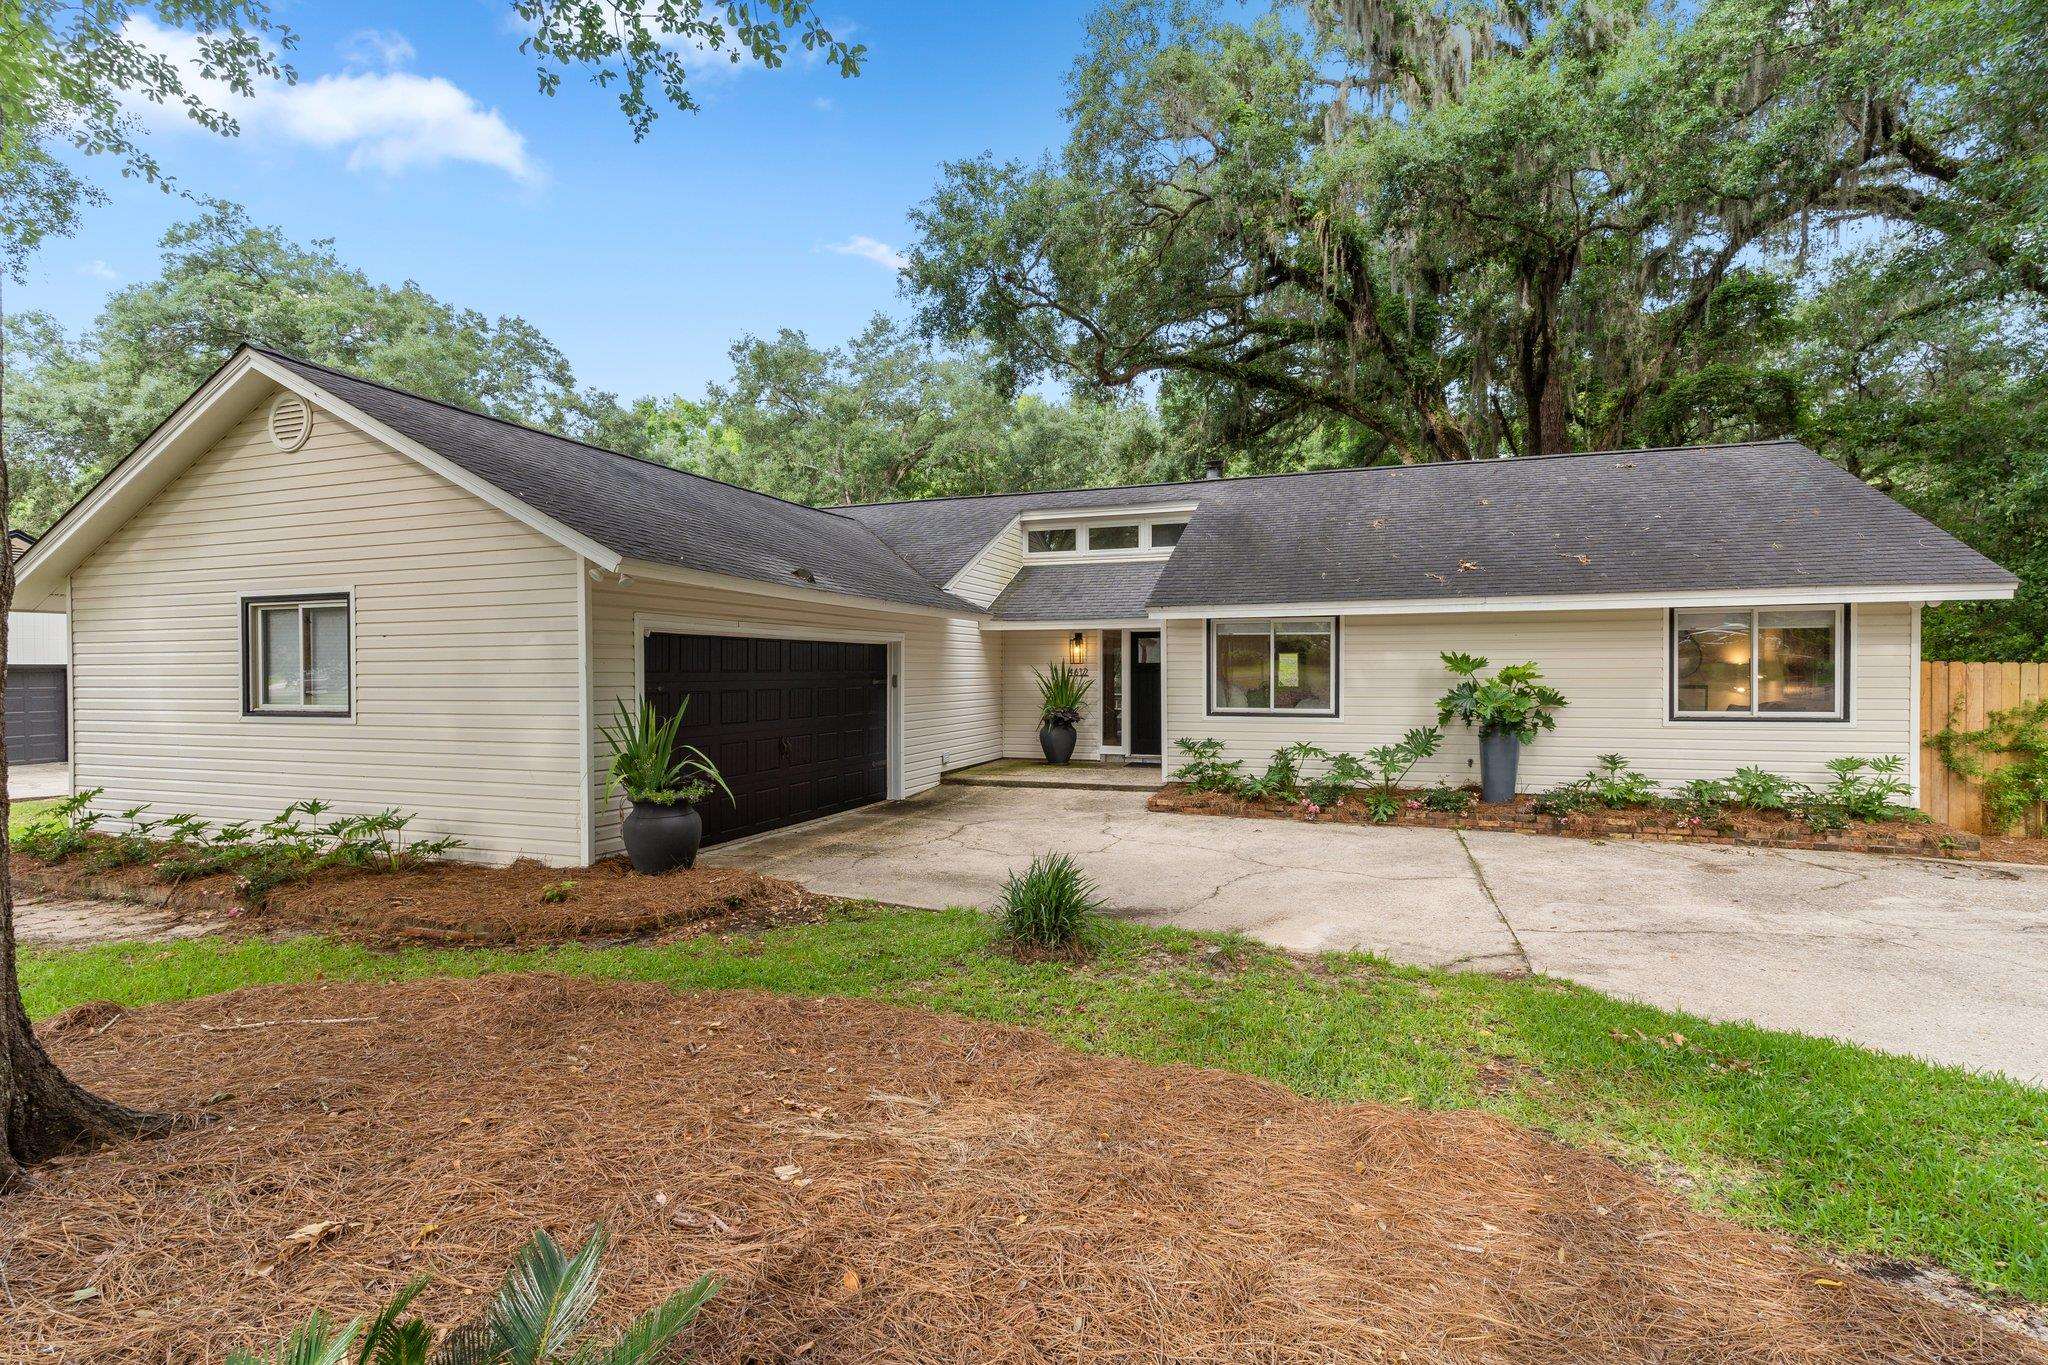 Property: 4612 Inisheer Dr,Tallahassee, FL